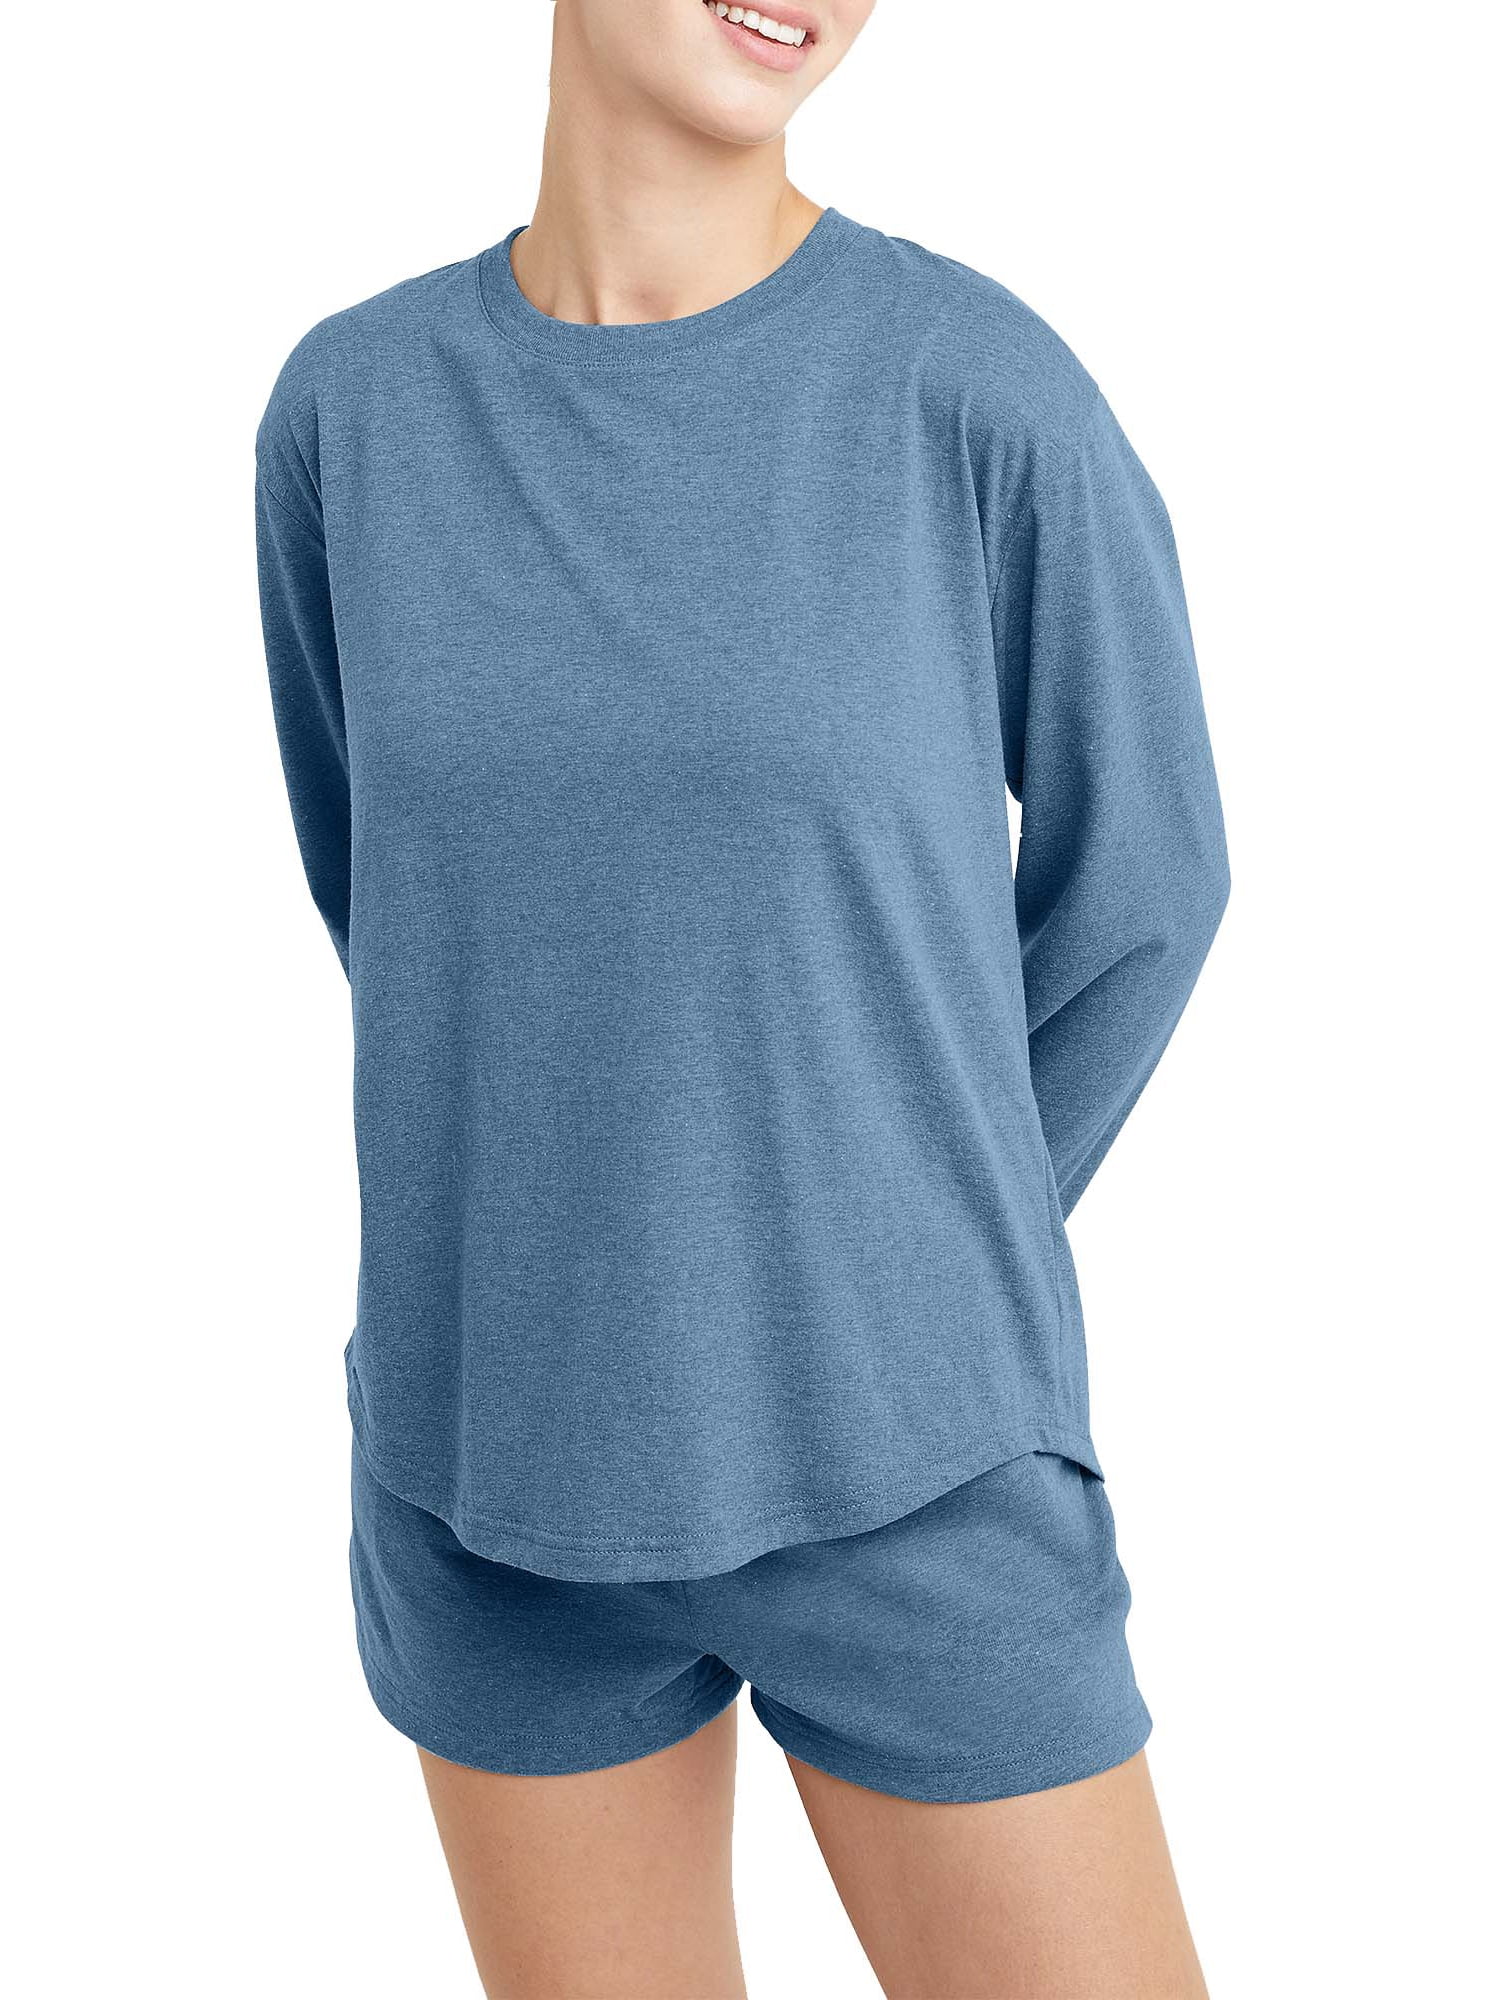 Hanes Originals Womens Tri-Blend Relaxed Fit T-Shirt, Oversized